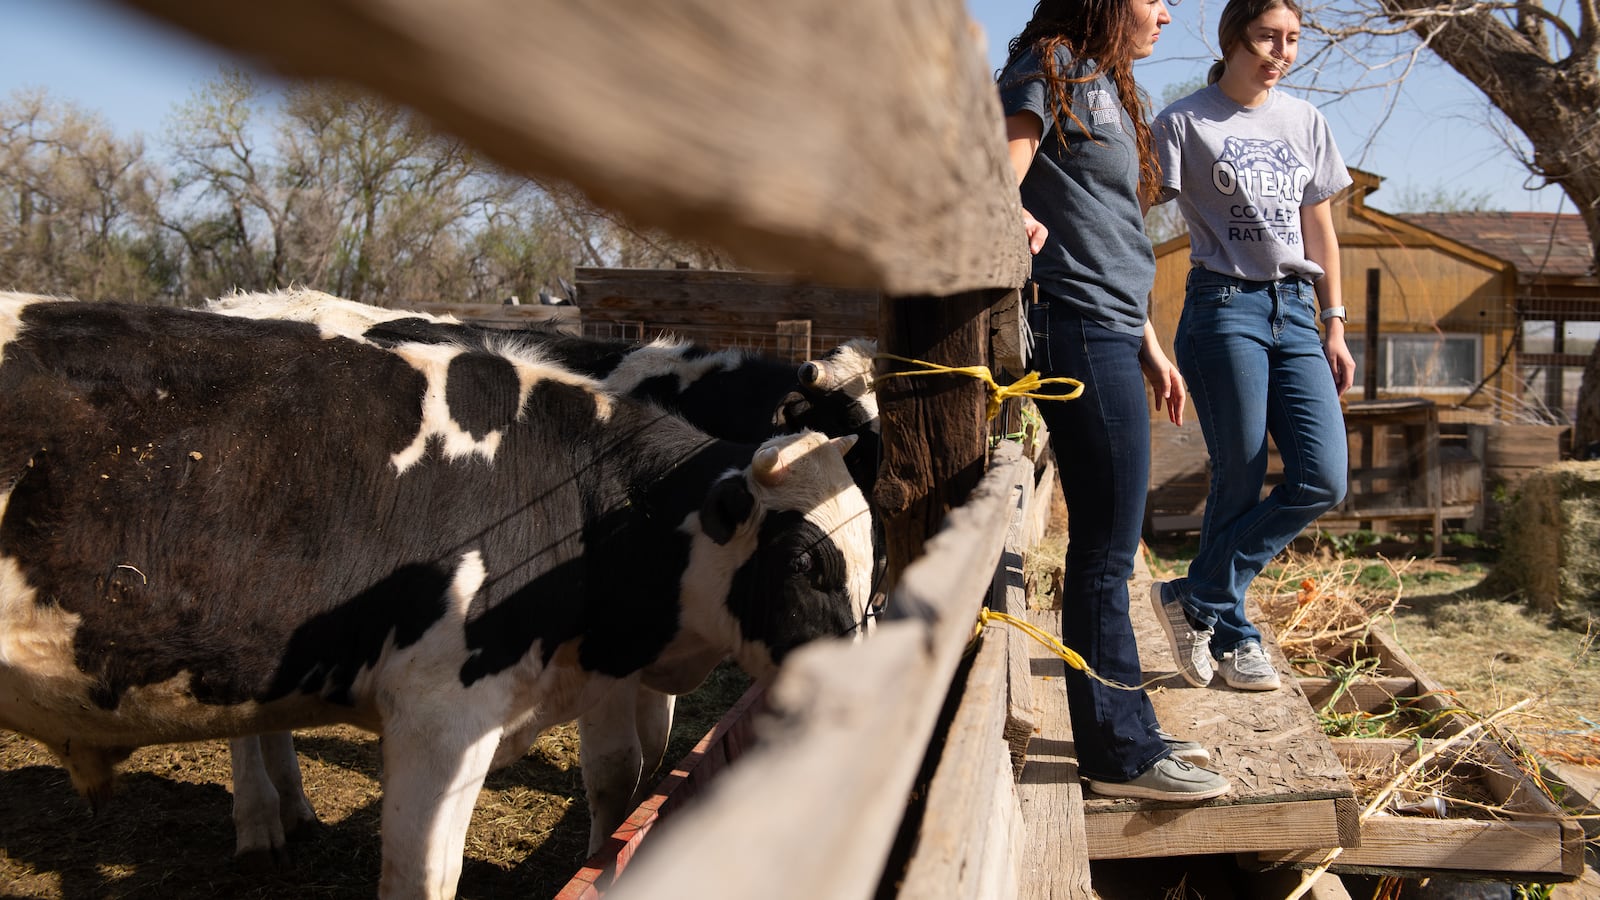 Two young women lean against a fence on a farm, with black and white spotted cows on the other side of the barrier.